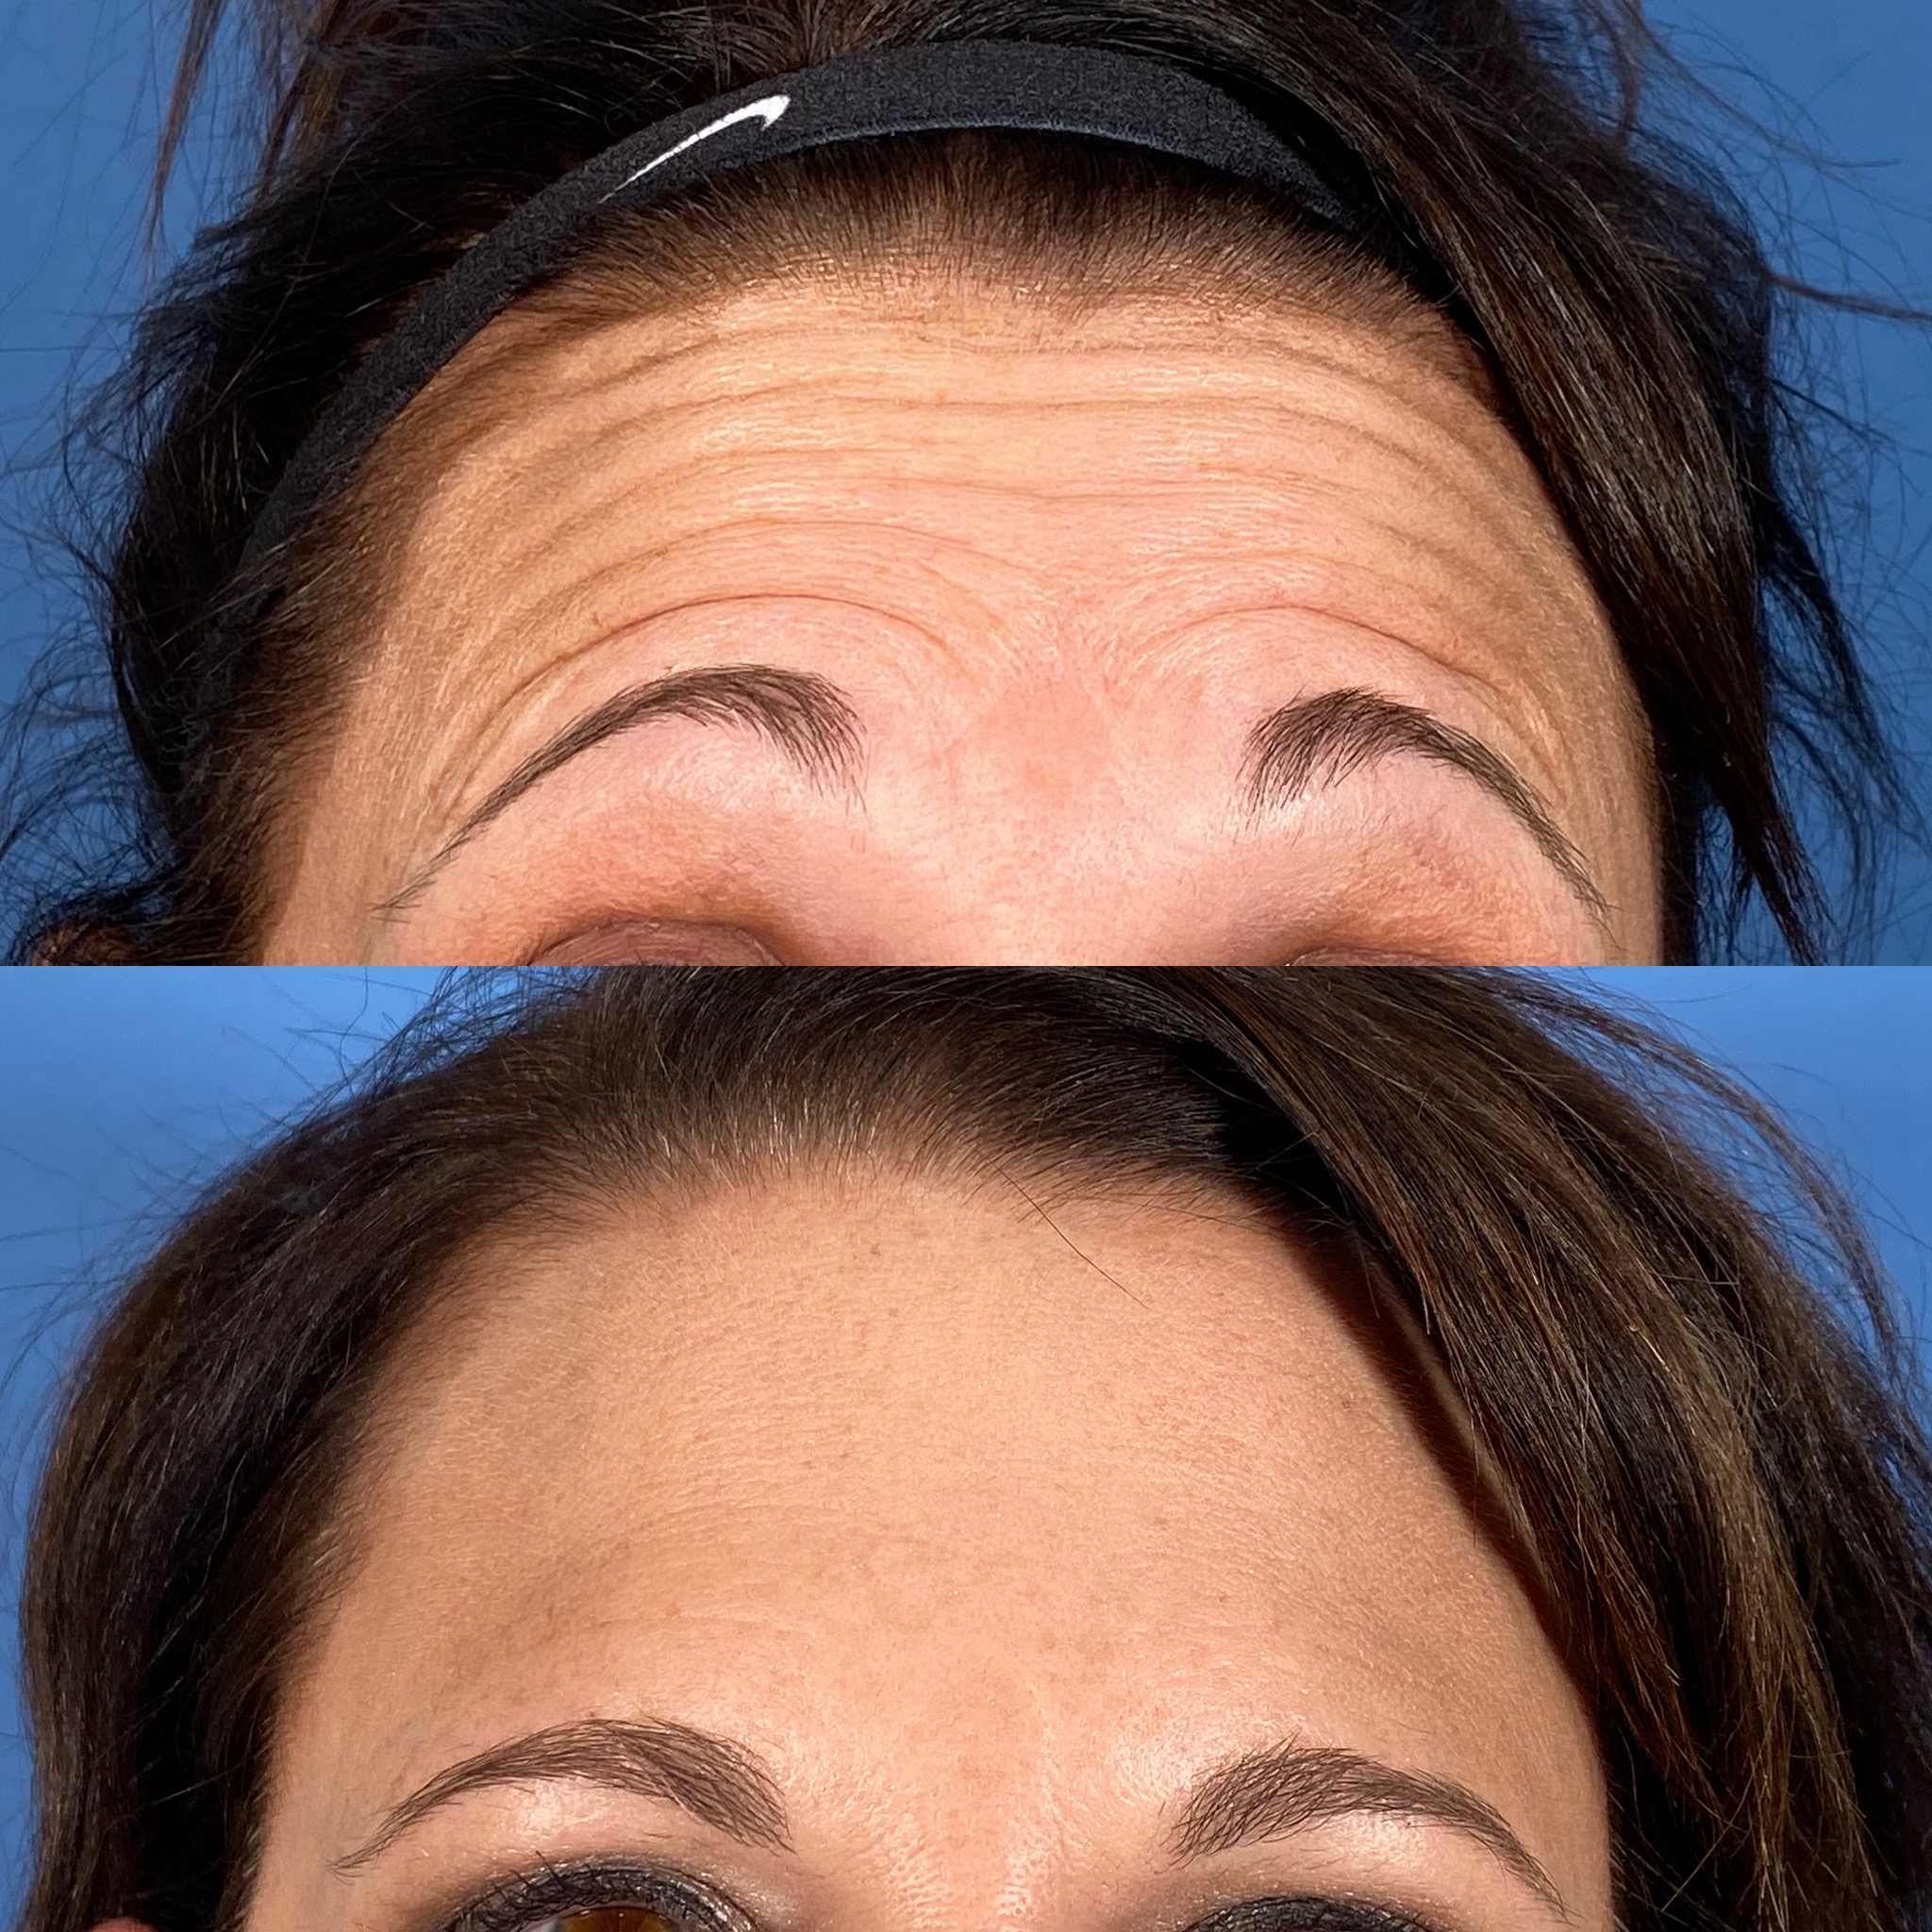 Botox + Fillers Before and After Photo by Wyndhurst Aesthetics in Lynchburg, VA